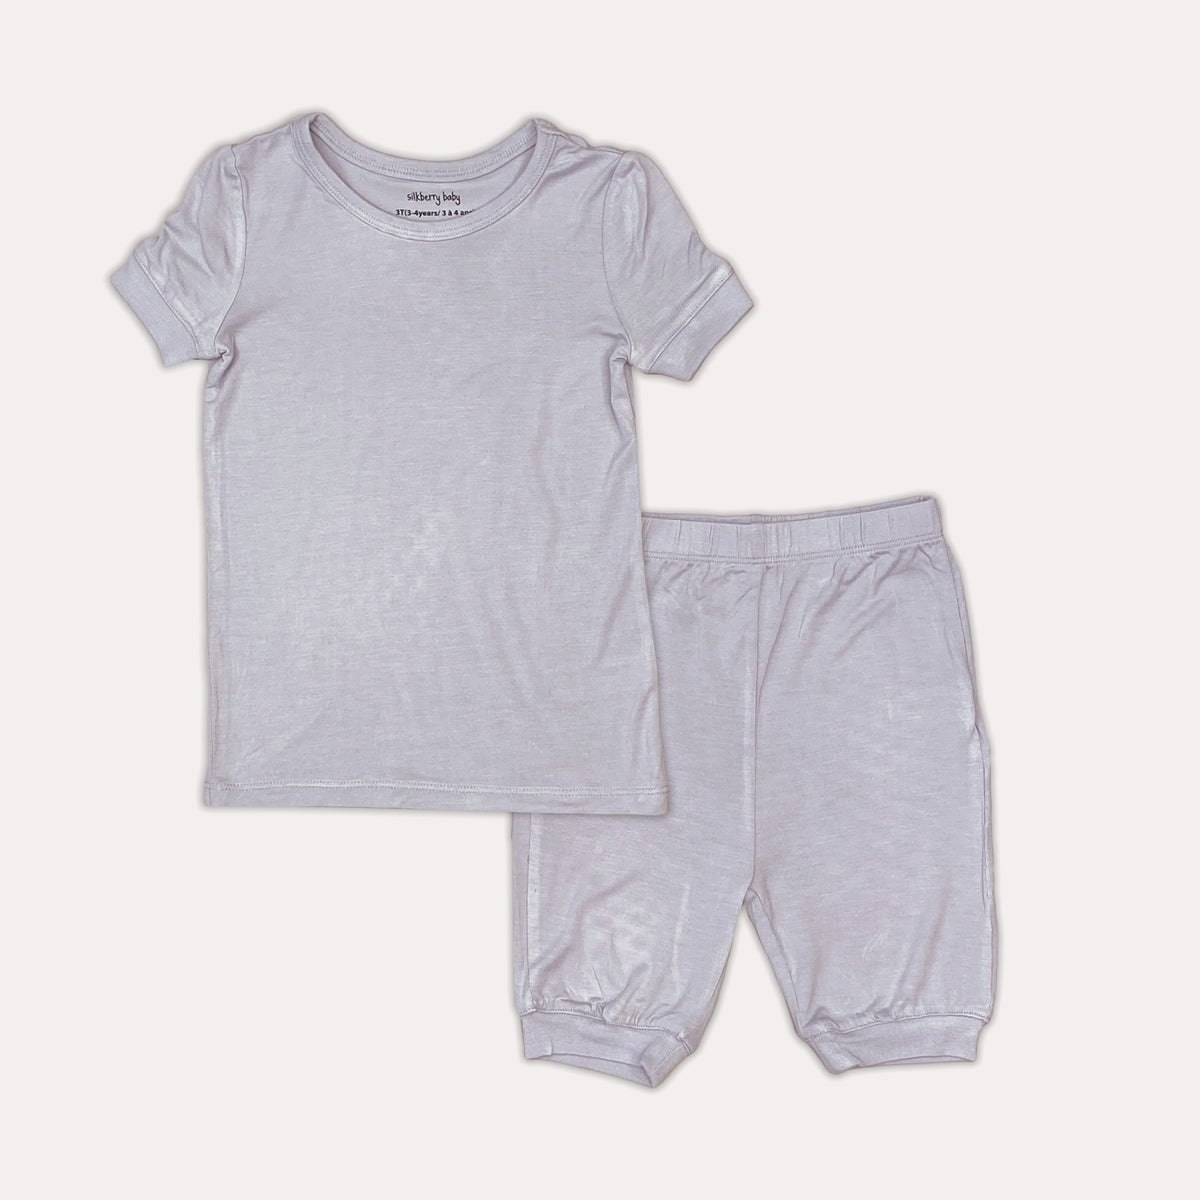 Silkberry Baby Bamboo Footed PJ’s | Keep Them Little BB